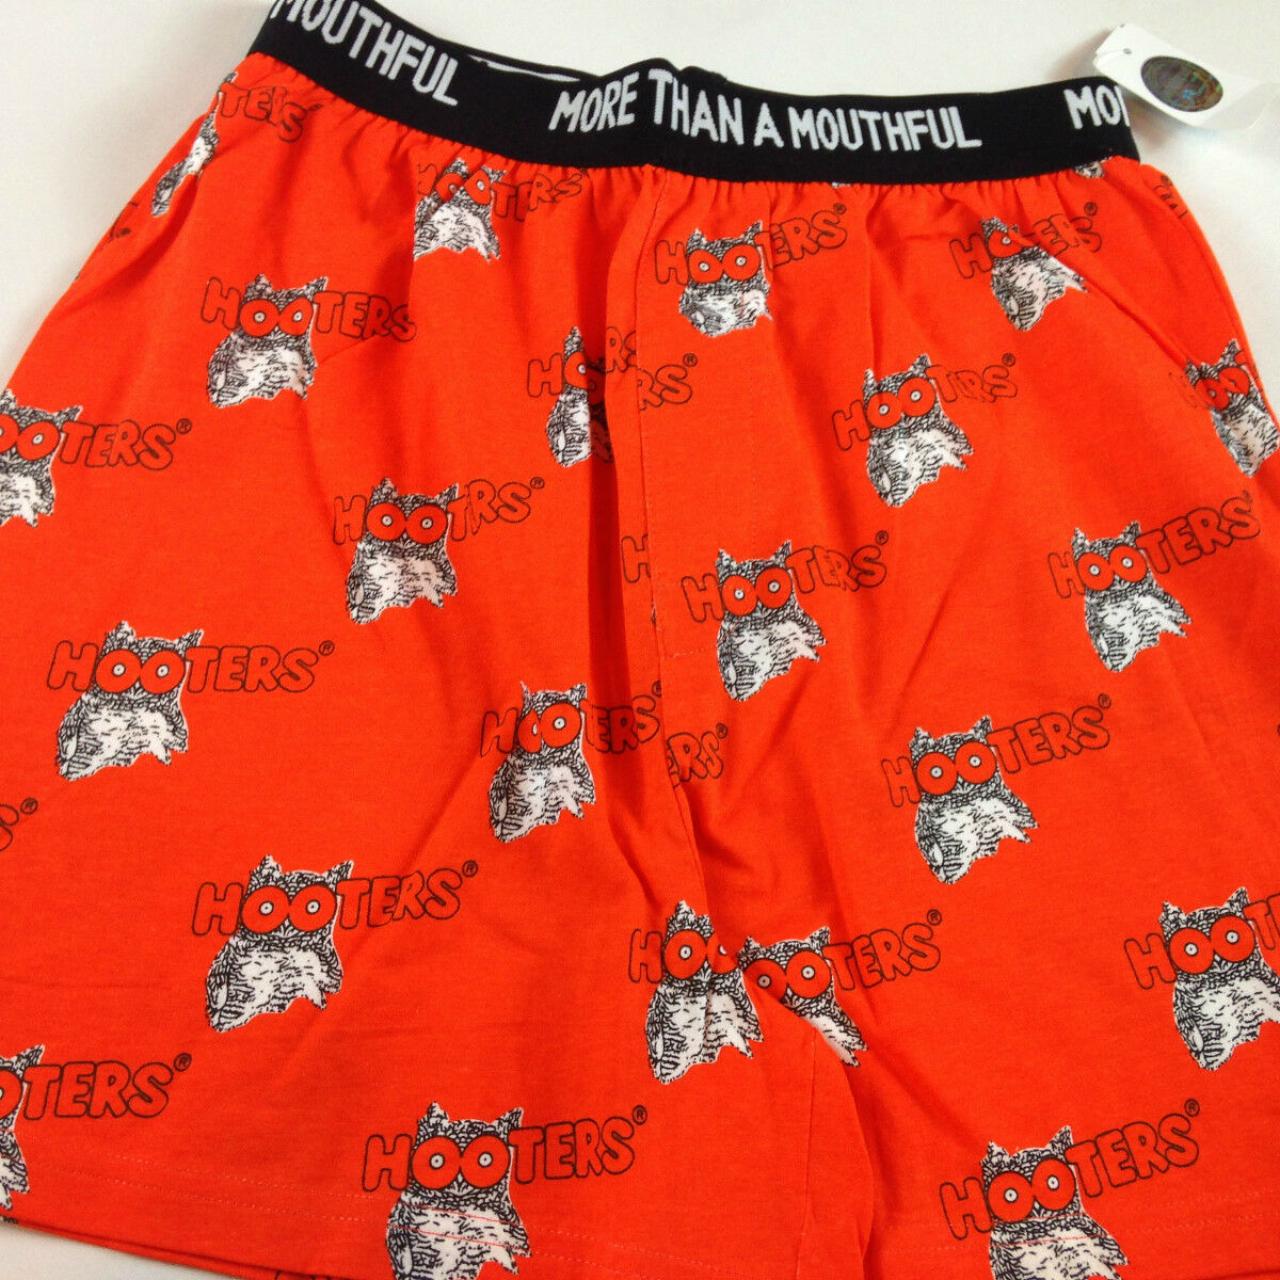 Hooters Boxer Shorts More Than A Mouthful NEW - Depop